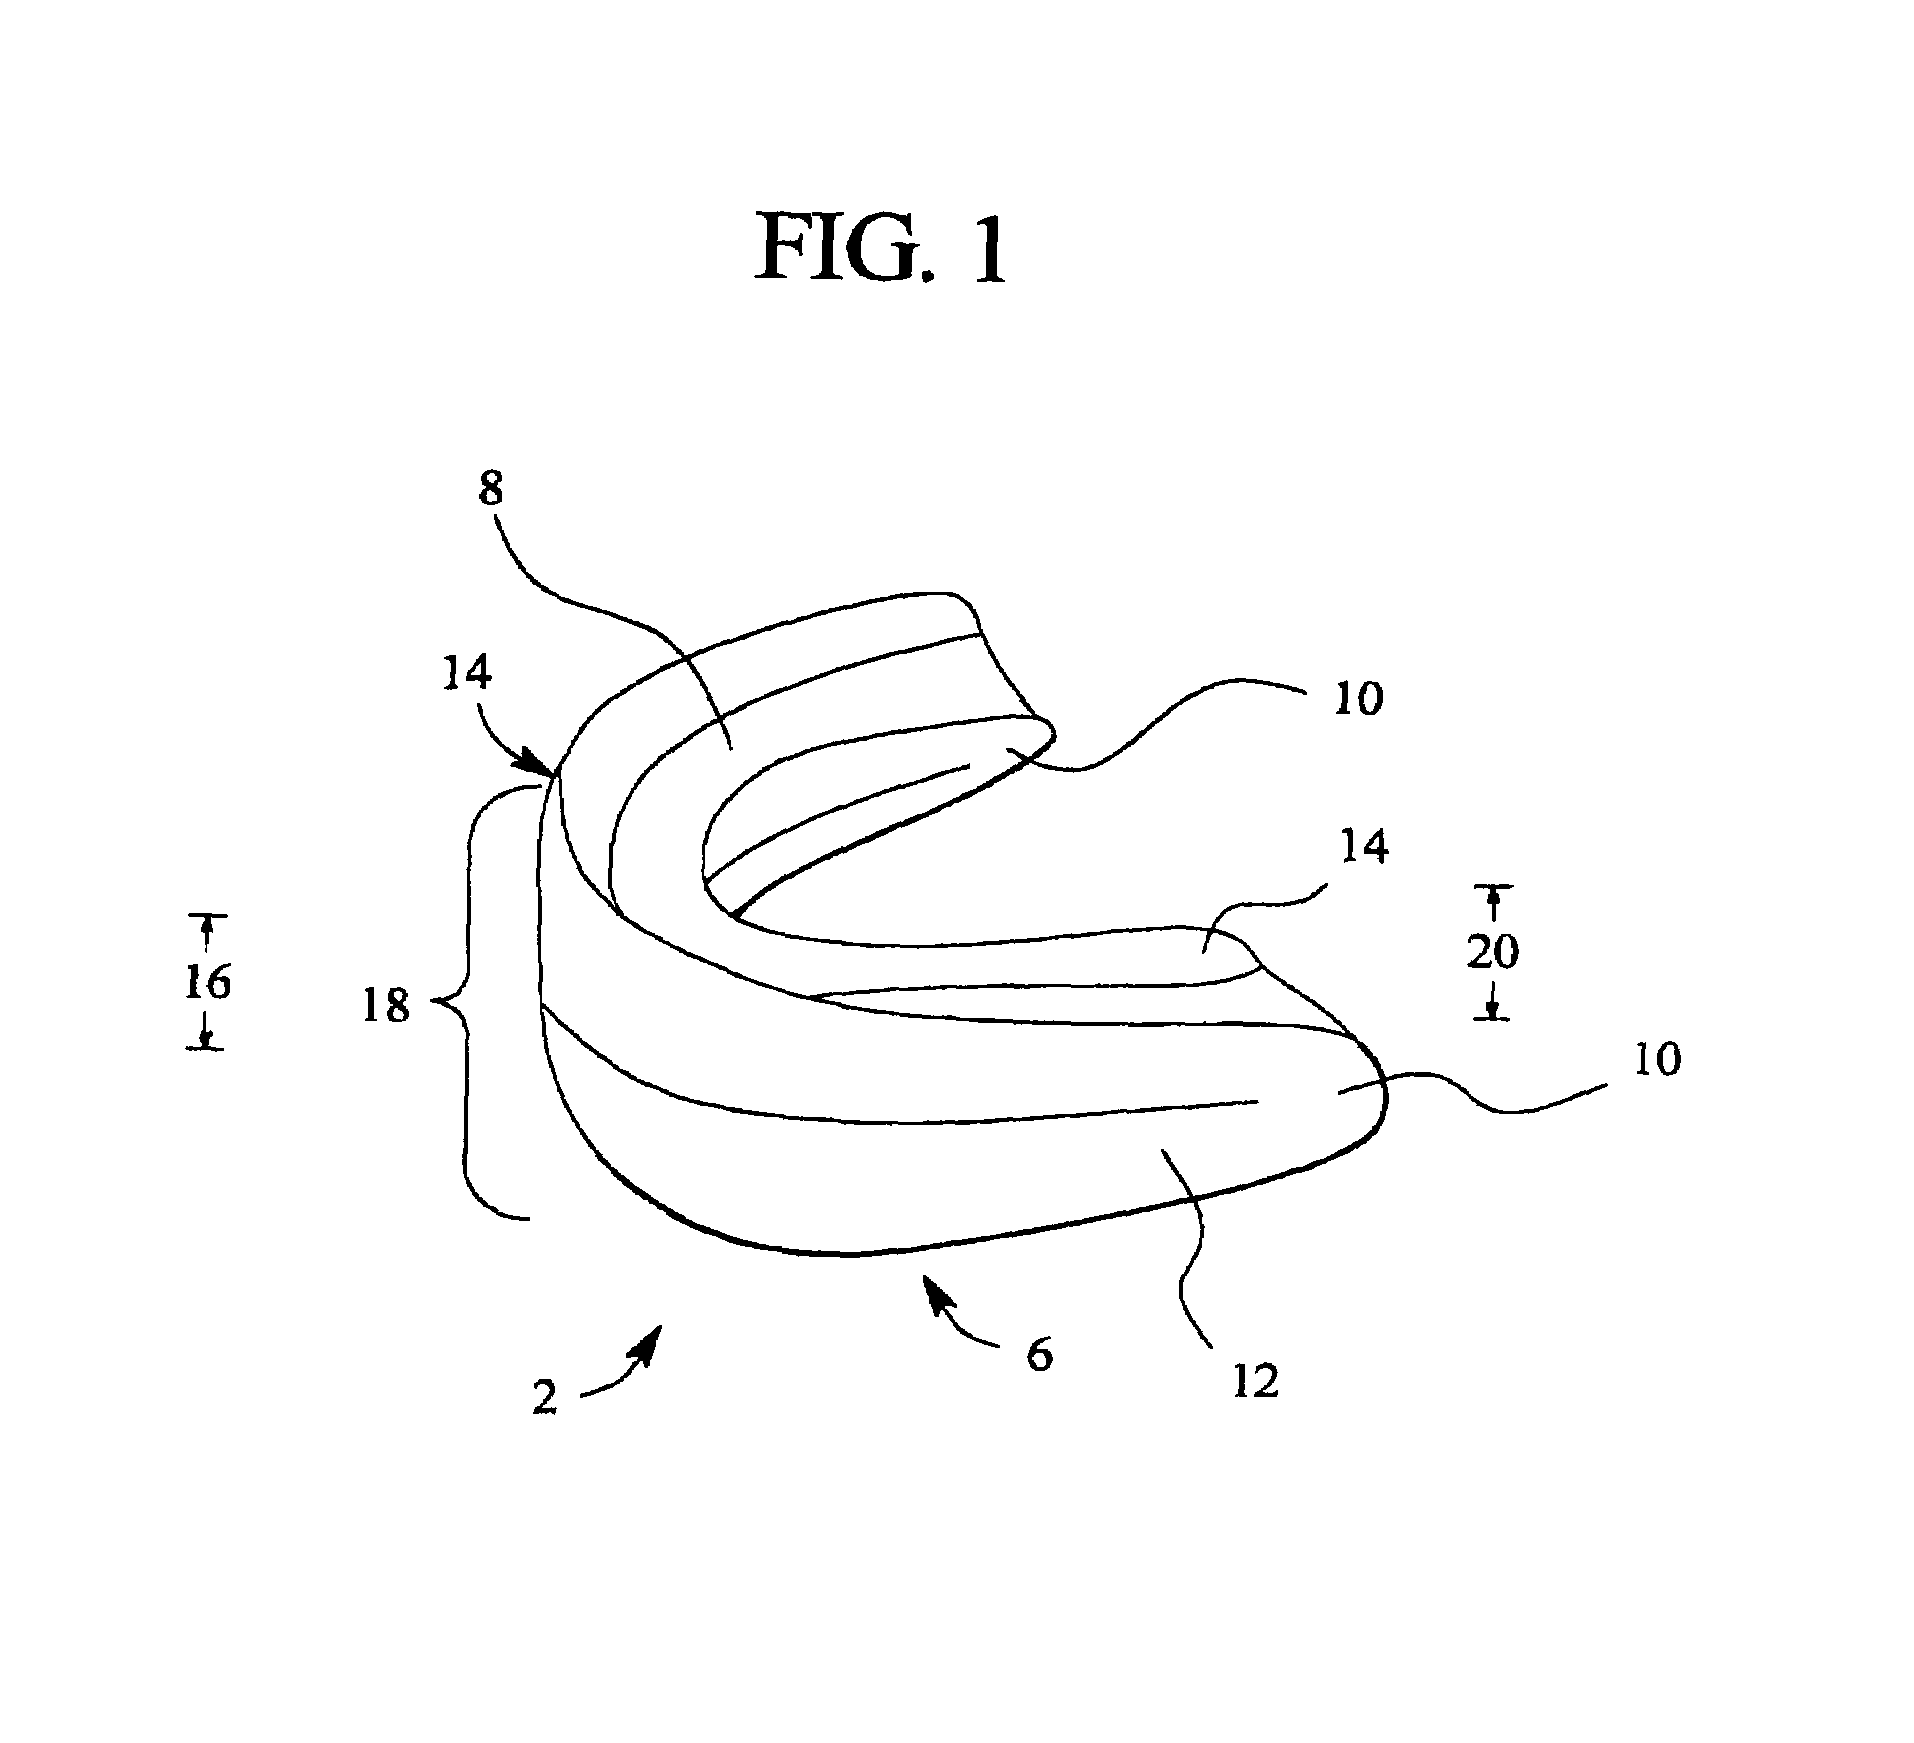 Dental appliance having an altered vertical thickness between an upper shell and a lower shell with an integrated hinging mechanism to attach an upper shell and a lower shell and a system and a method for treating malocclusions